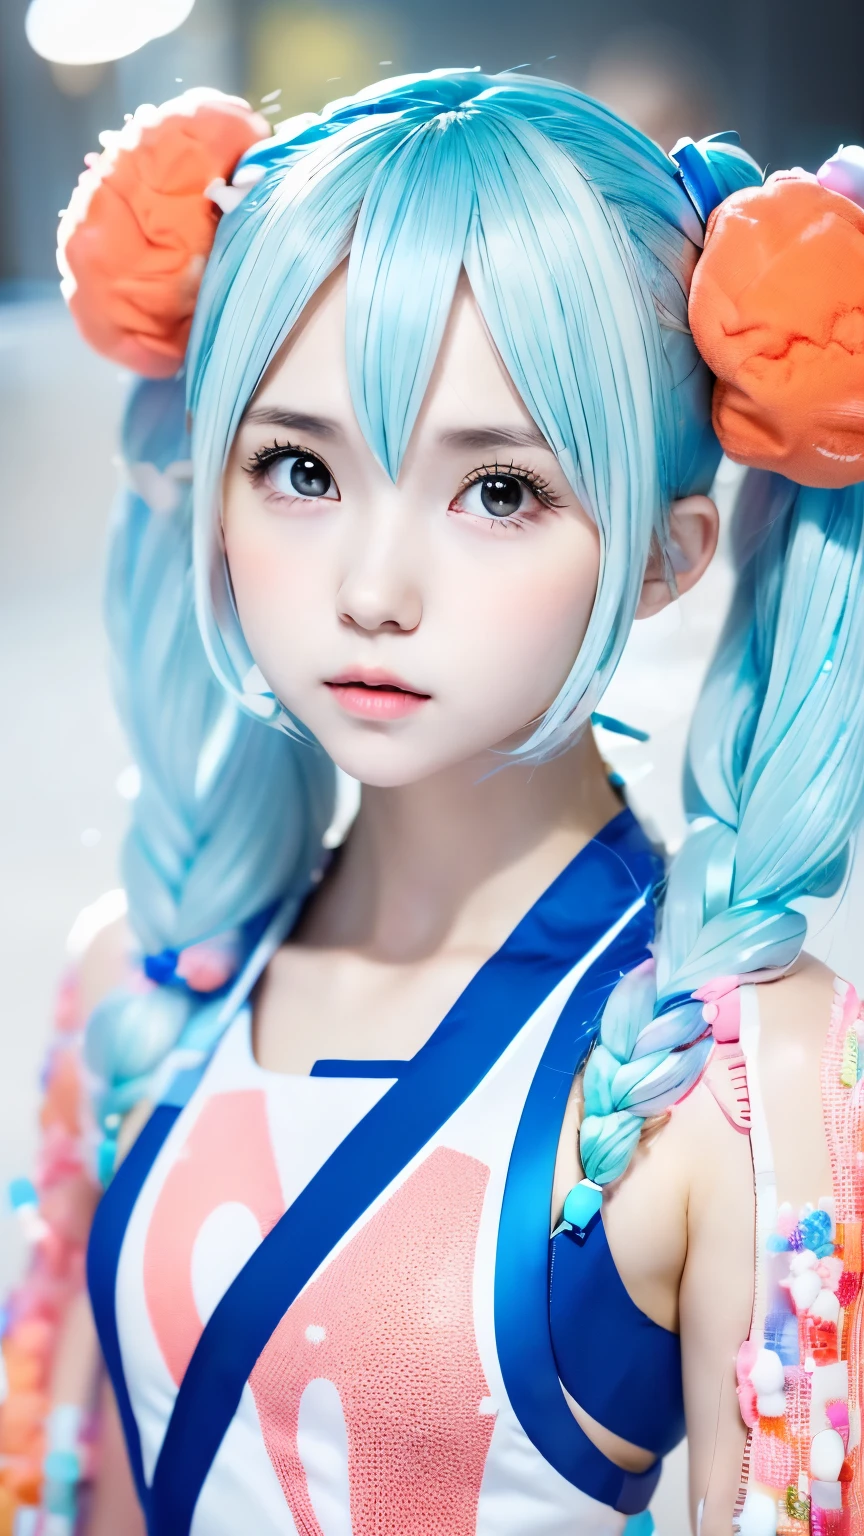 one girl、hatsune miku cosplay、anatomy、Correct depiction of the human body、Upper body angle、、１４talent、beautiful white skin、cute face、small nose、plump lips、small orange eyeeticulously drawn face、highly detailed skin、natural skin texture、Your fingers are clean and delicate.、small breasts、small breasts、An ennui look、detailed face、Dirty hair、Standing、Random attire、Random colored shirts、perfectly blurred background、